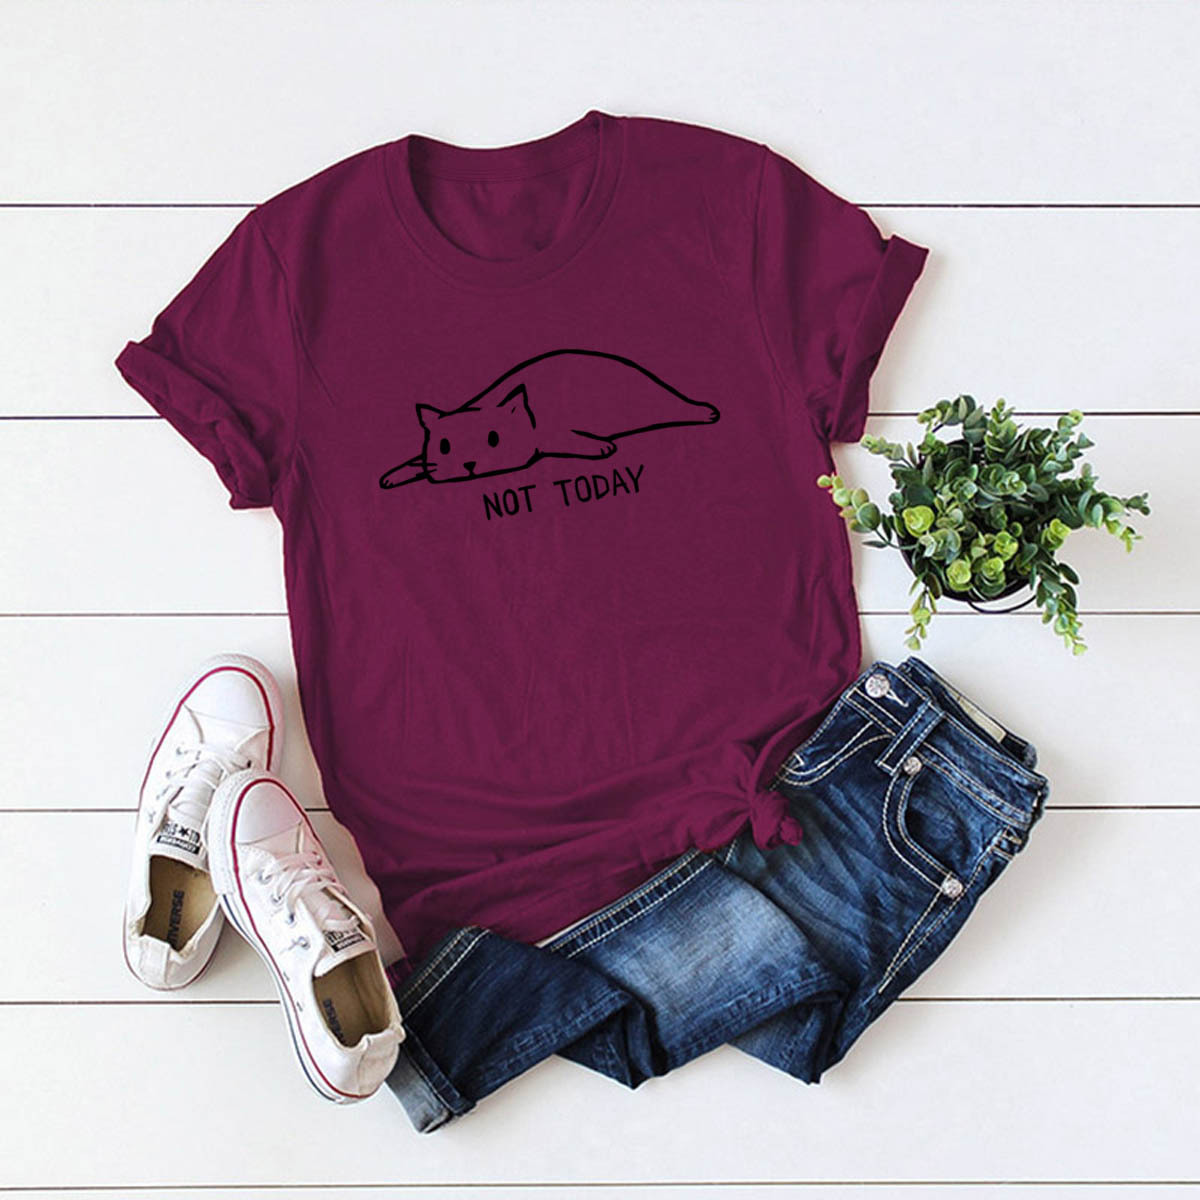  The best designs of the year for a women's T-shirt of pure cotton with short sleeves on it, a graphic clipping accompanied by letters and phrases